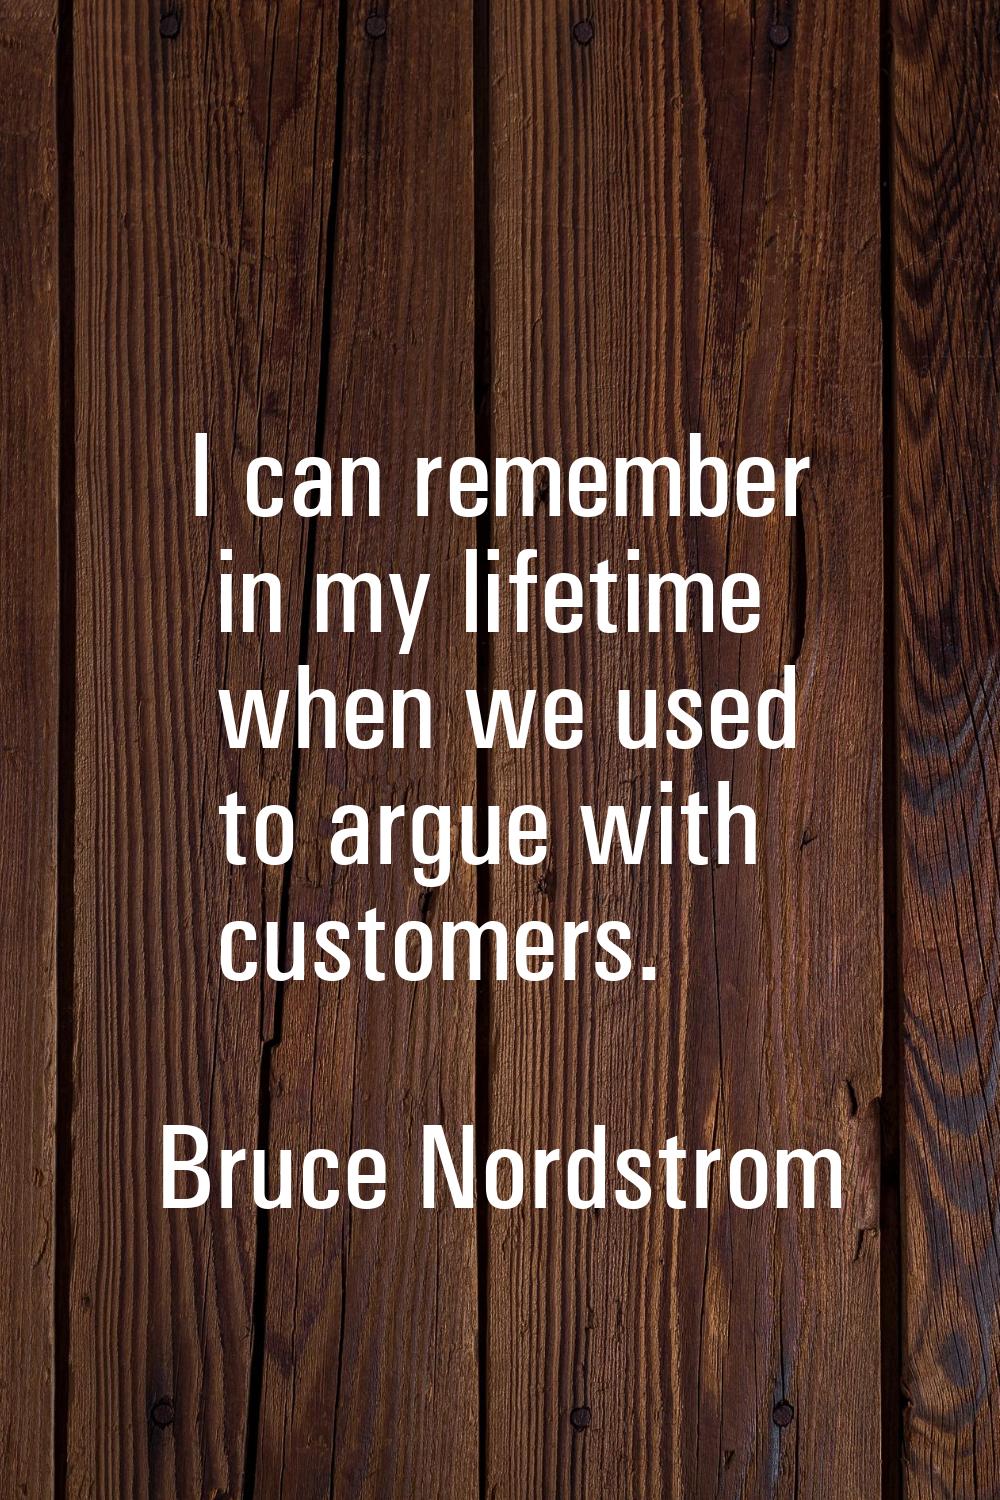 I can remember in my lifetime when we used to argue with customers.